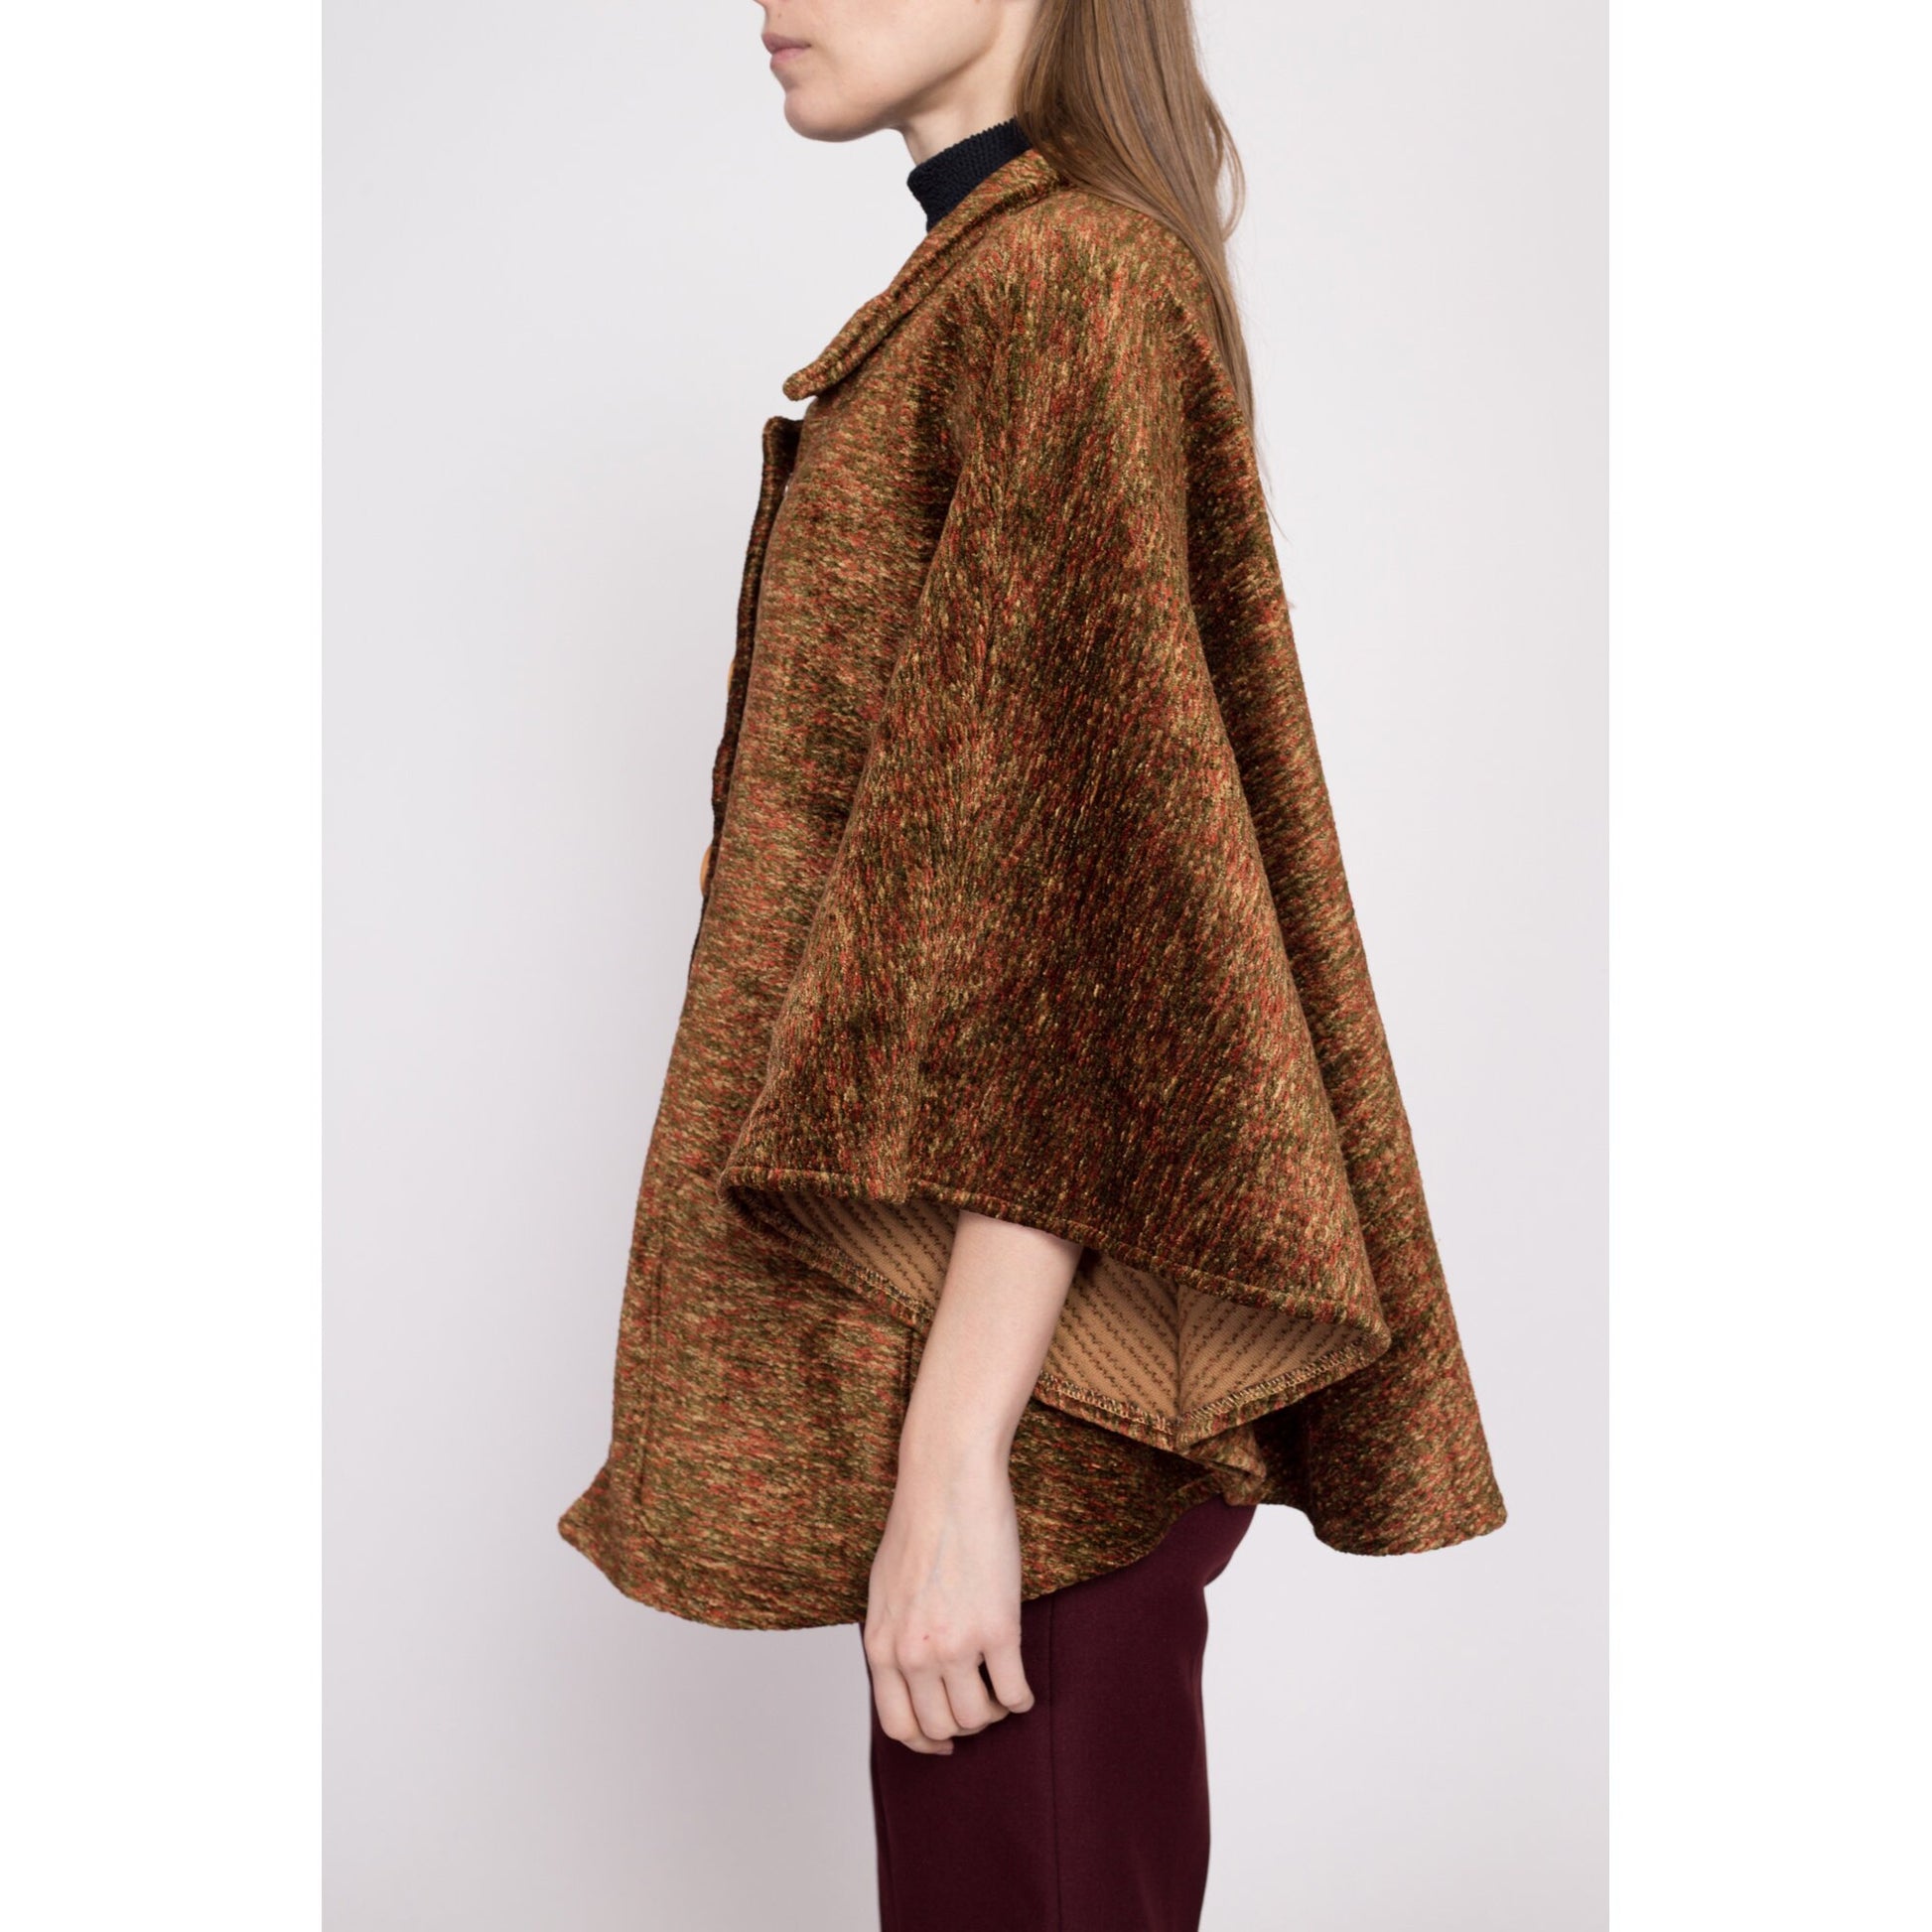 Vintage Plush Tapestry Cape Coat - One Size